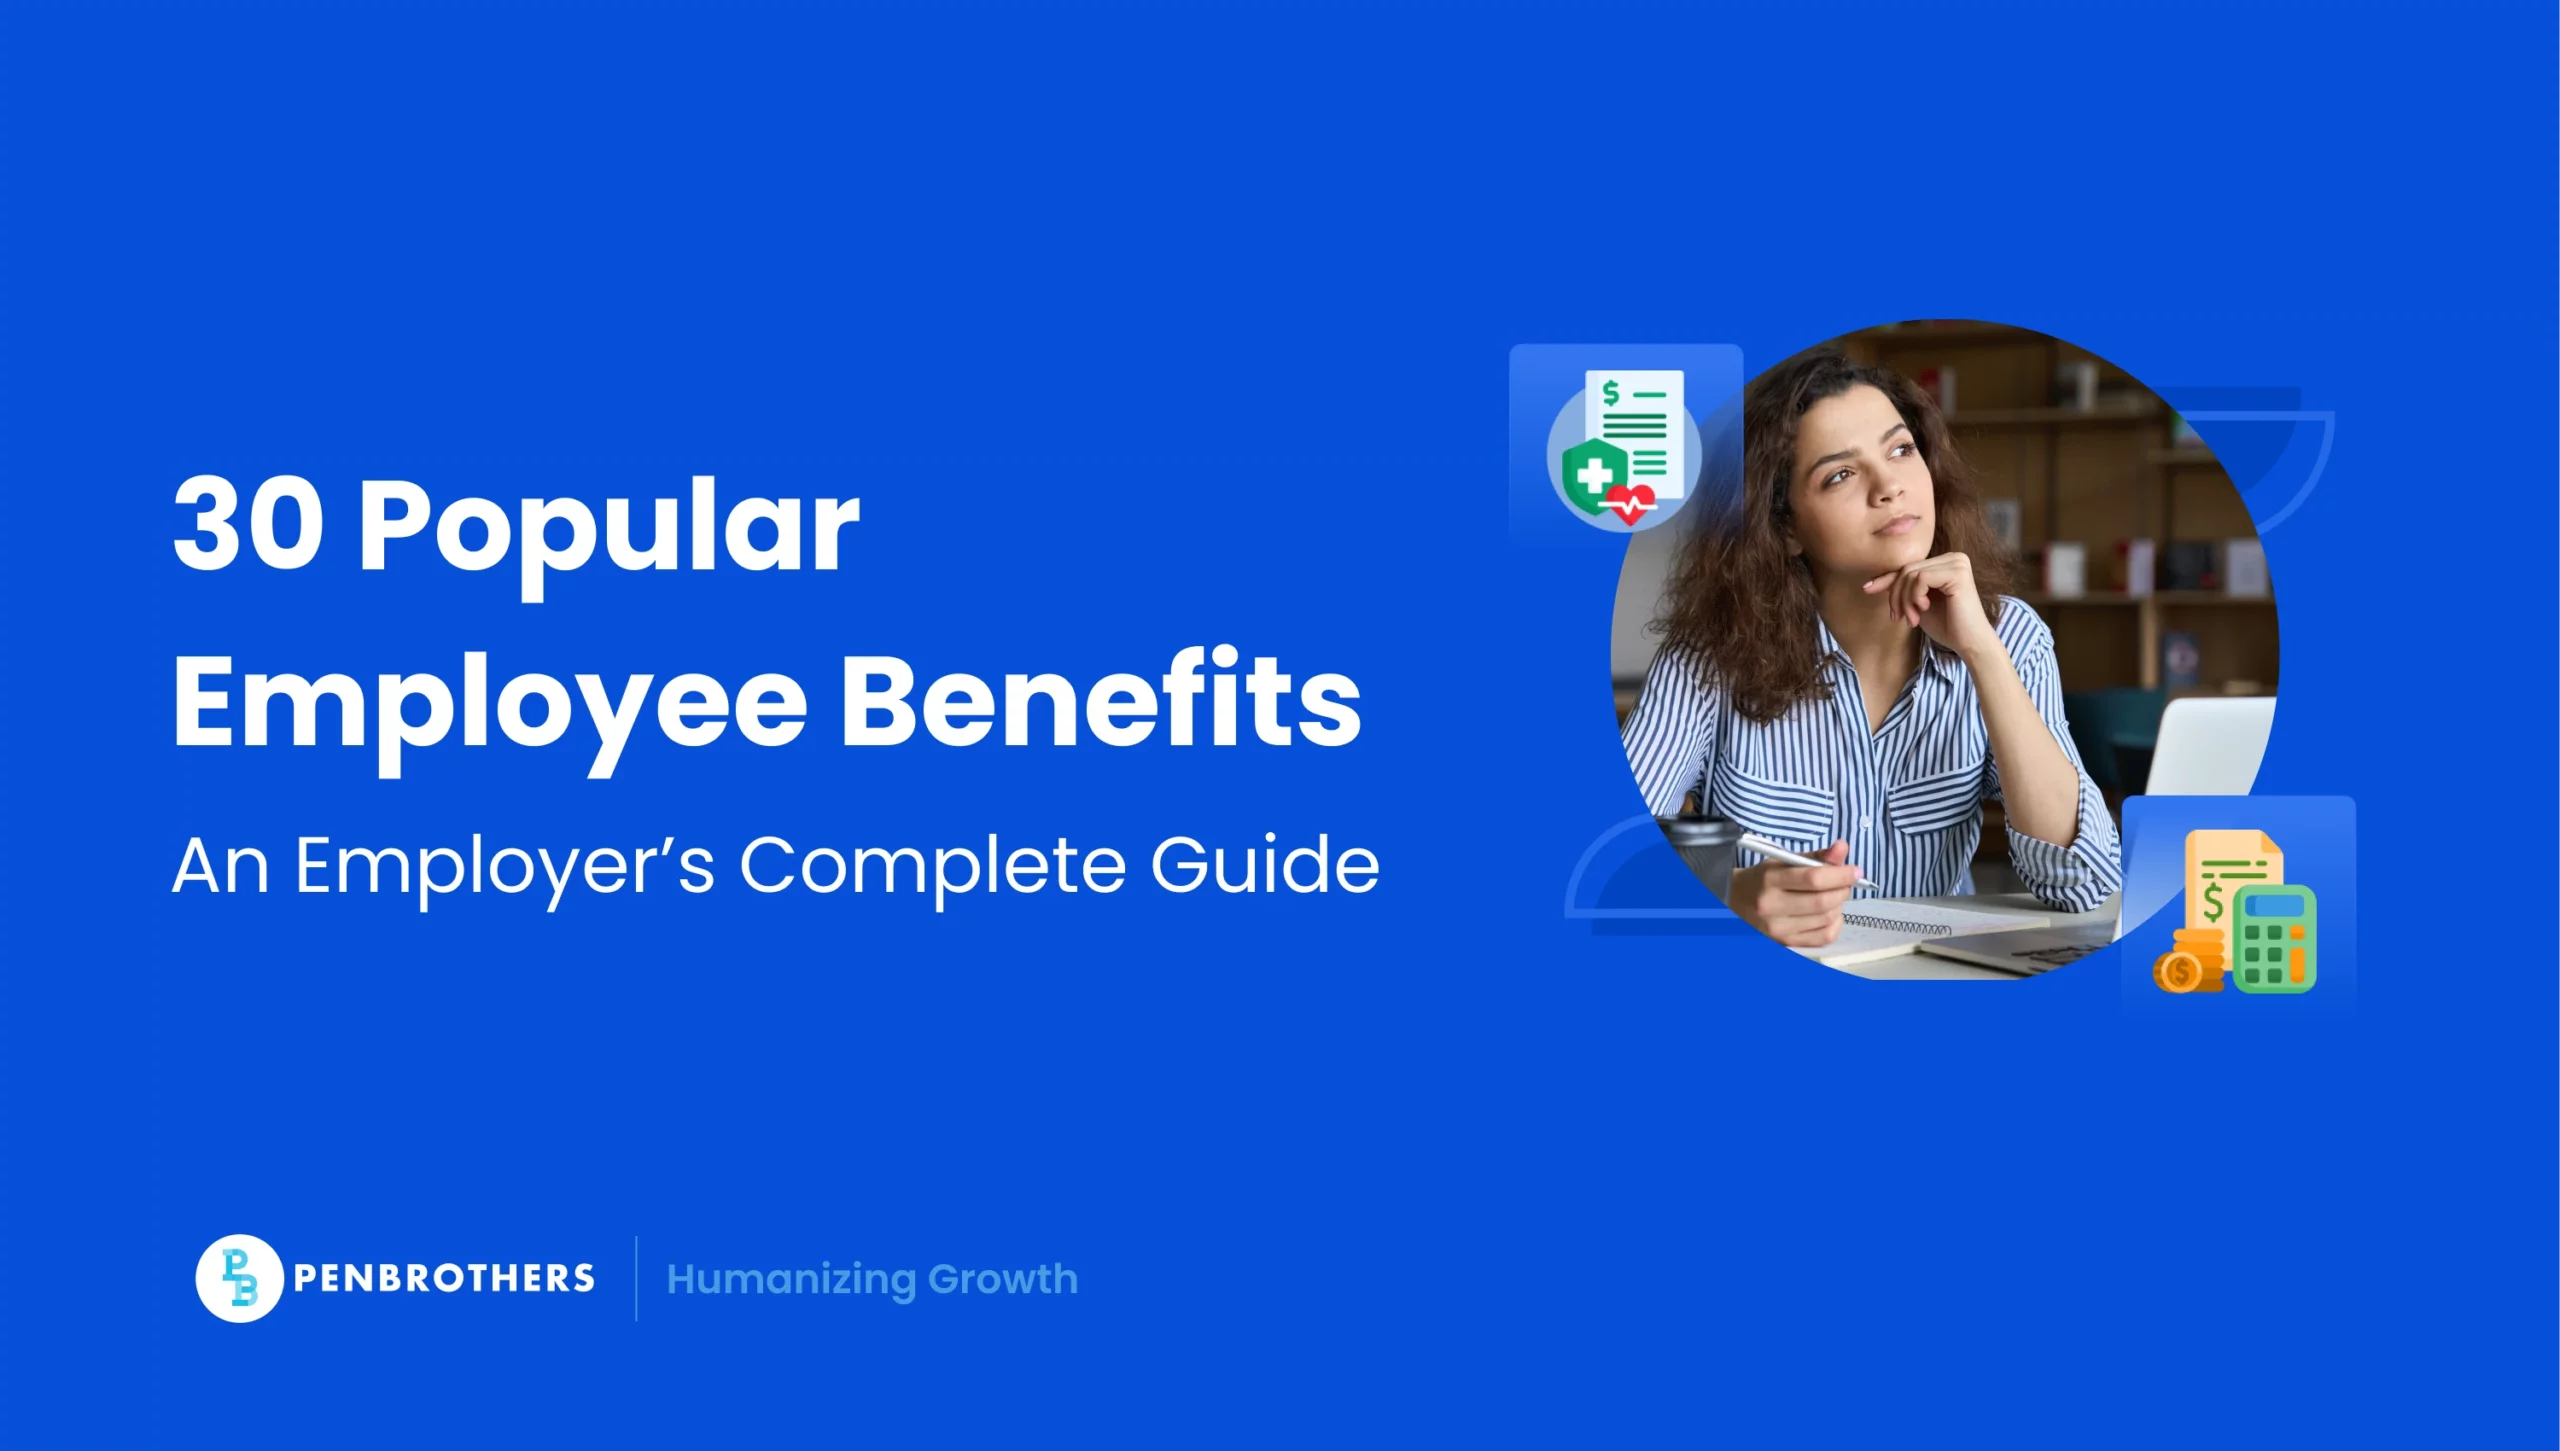 30 Popular Employee Benefits: An Employer’s Complete Guide